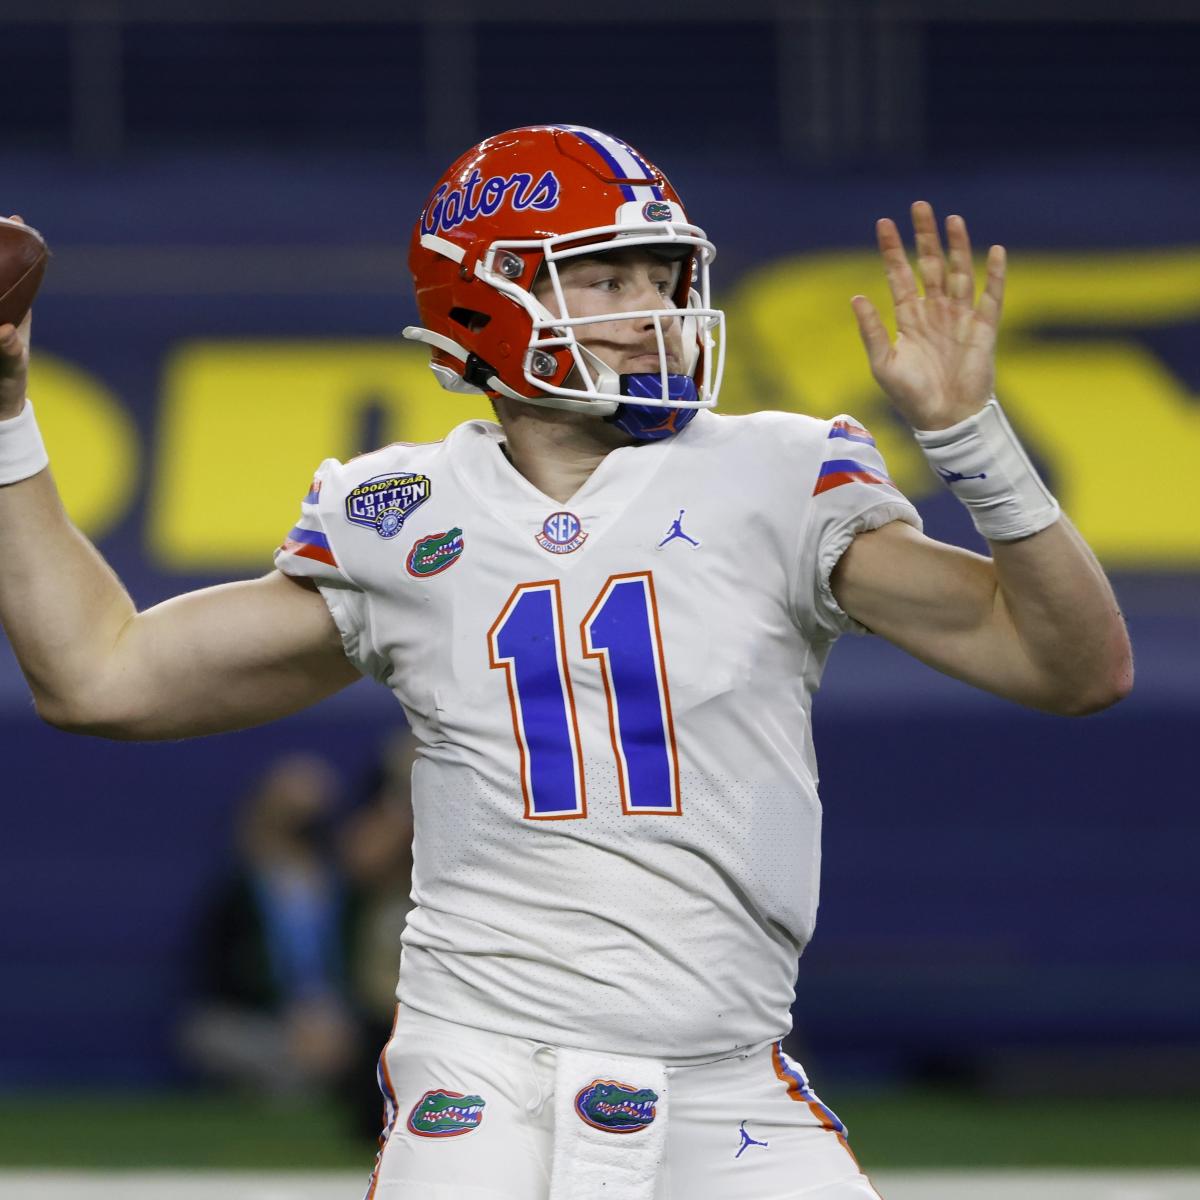 Video: Florida QB Kyle Trask Officially Declares for 2021 NFL Draft